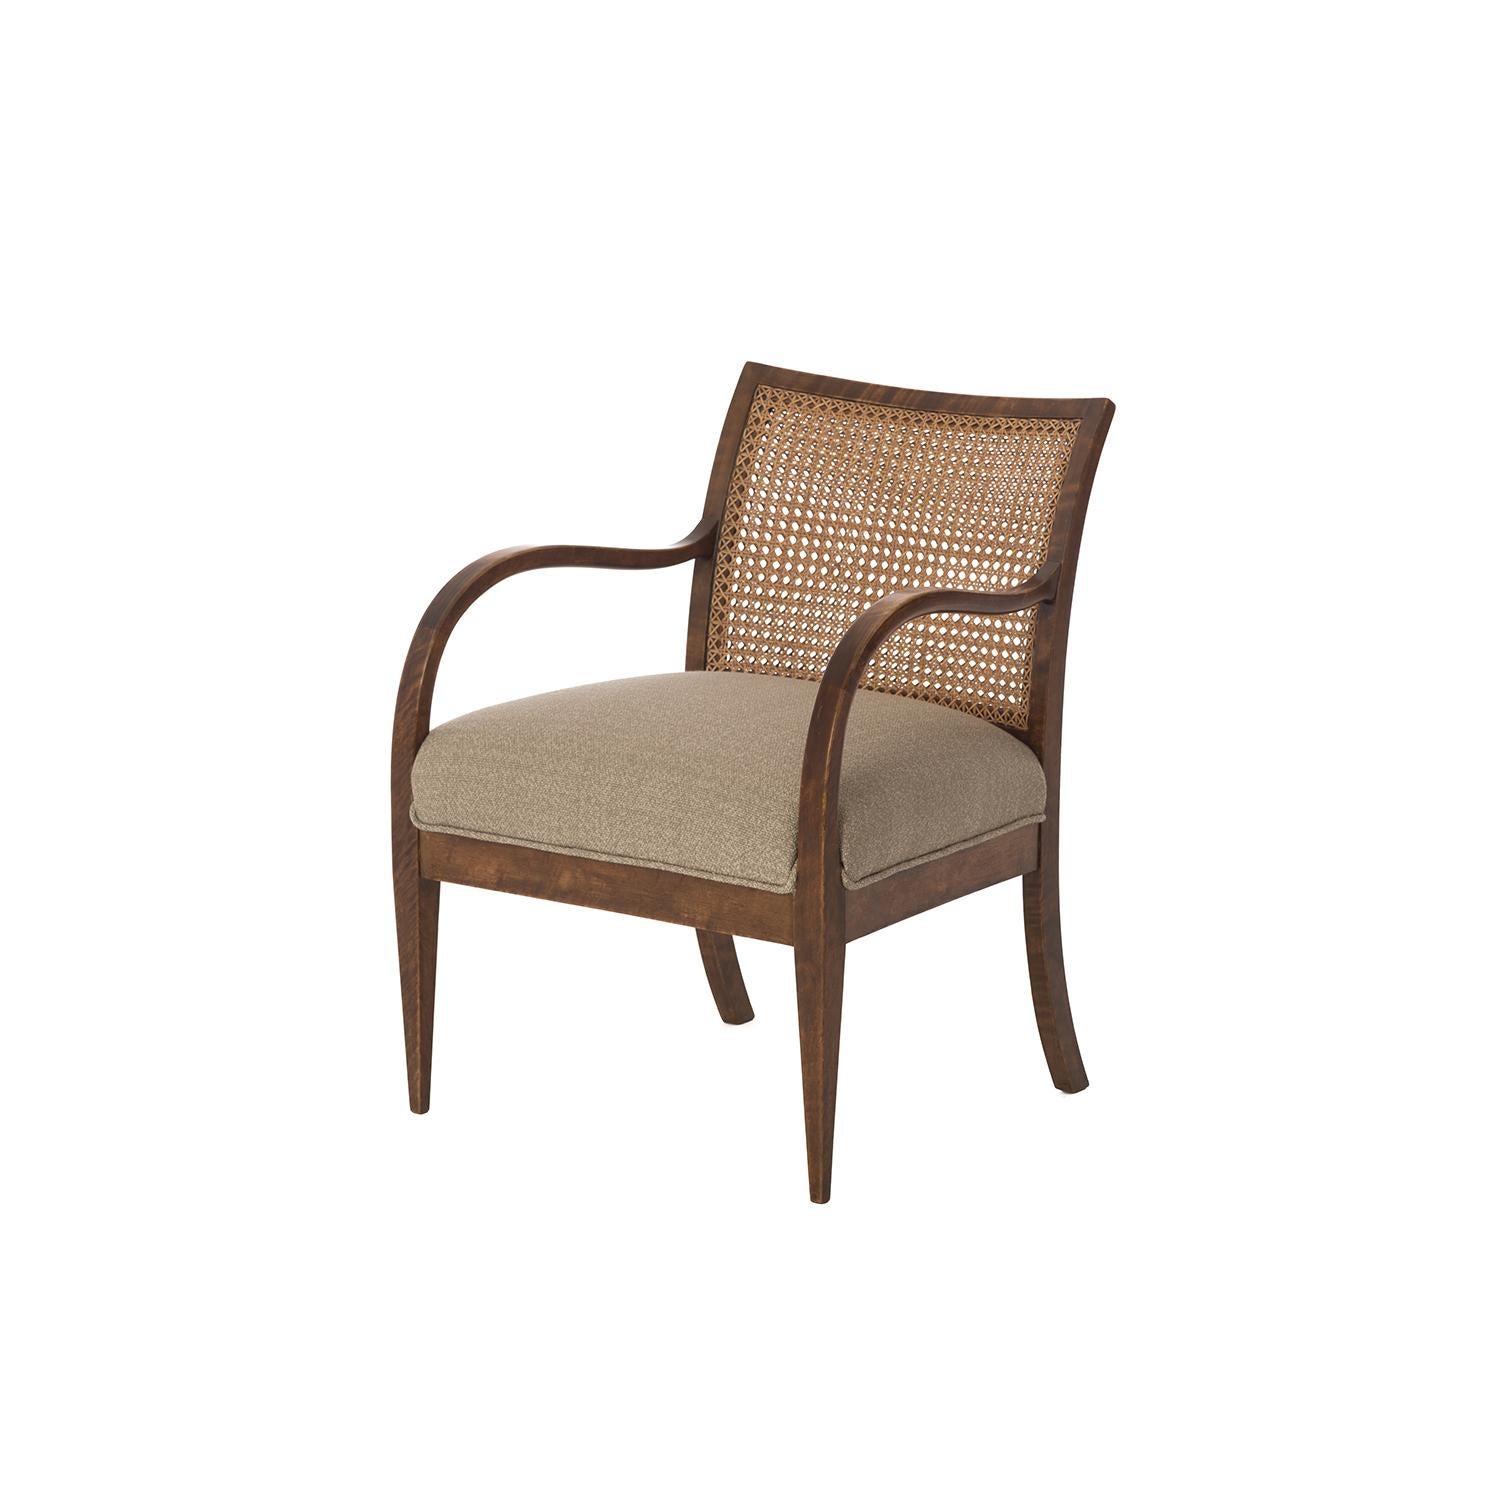 This armchair was designed and built by master Danish cabinet maker Frits Henningsen. The chair features a double layered cane back, new wool-linen blend upholstery in a flax/pale sage color scheme. The European beechwood frame has been cleaned up